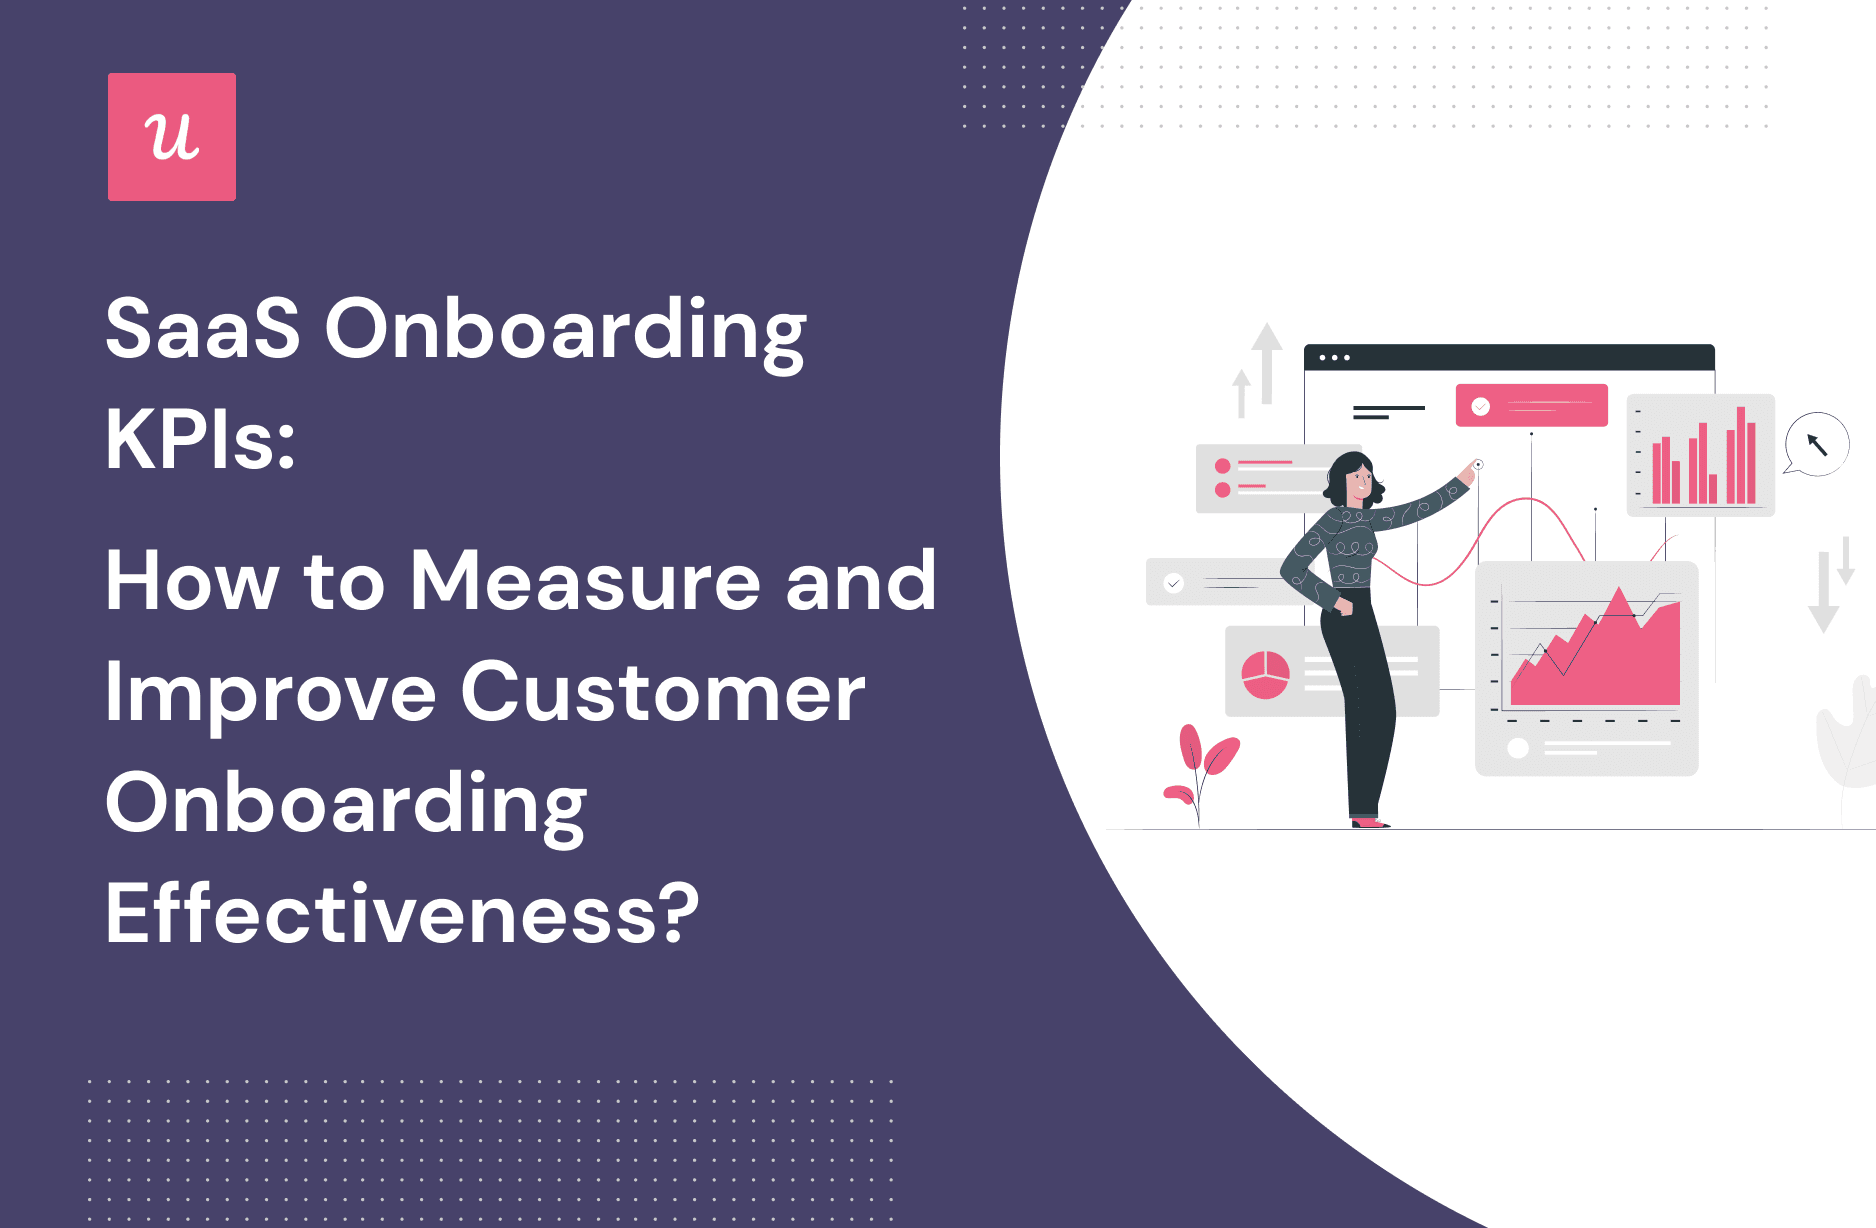 Onboarding KPIs for SaaS: How To Measure and Improve Customer Onboarding Effectiveness?